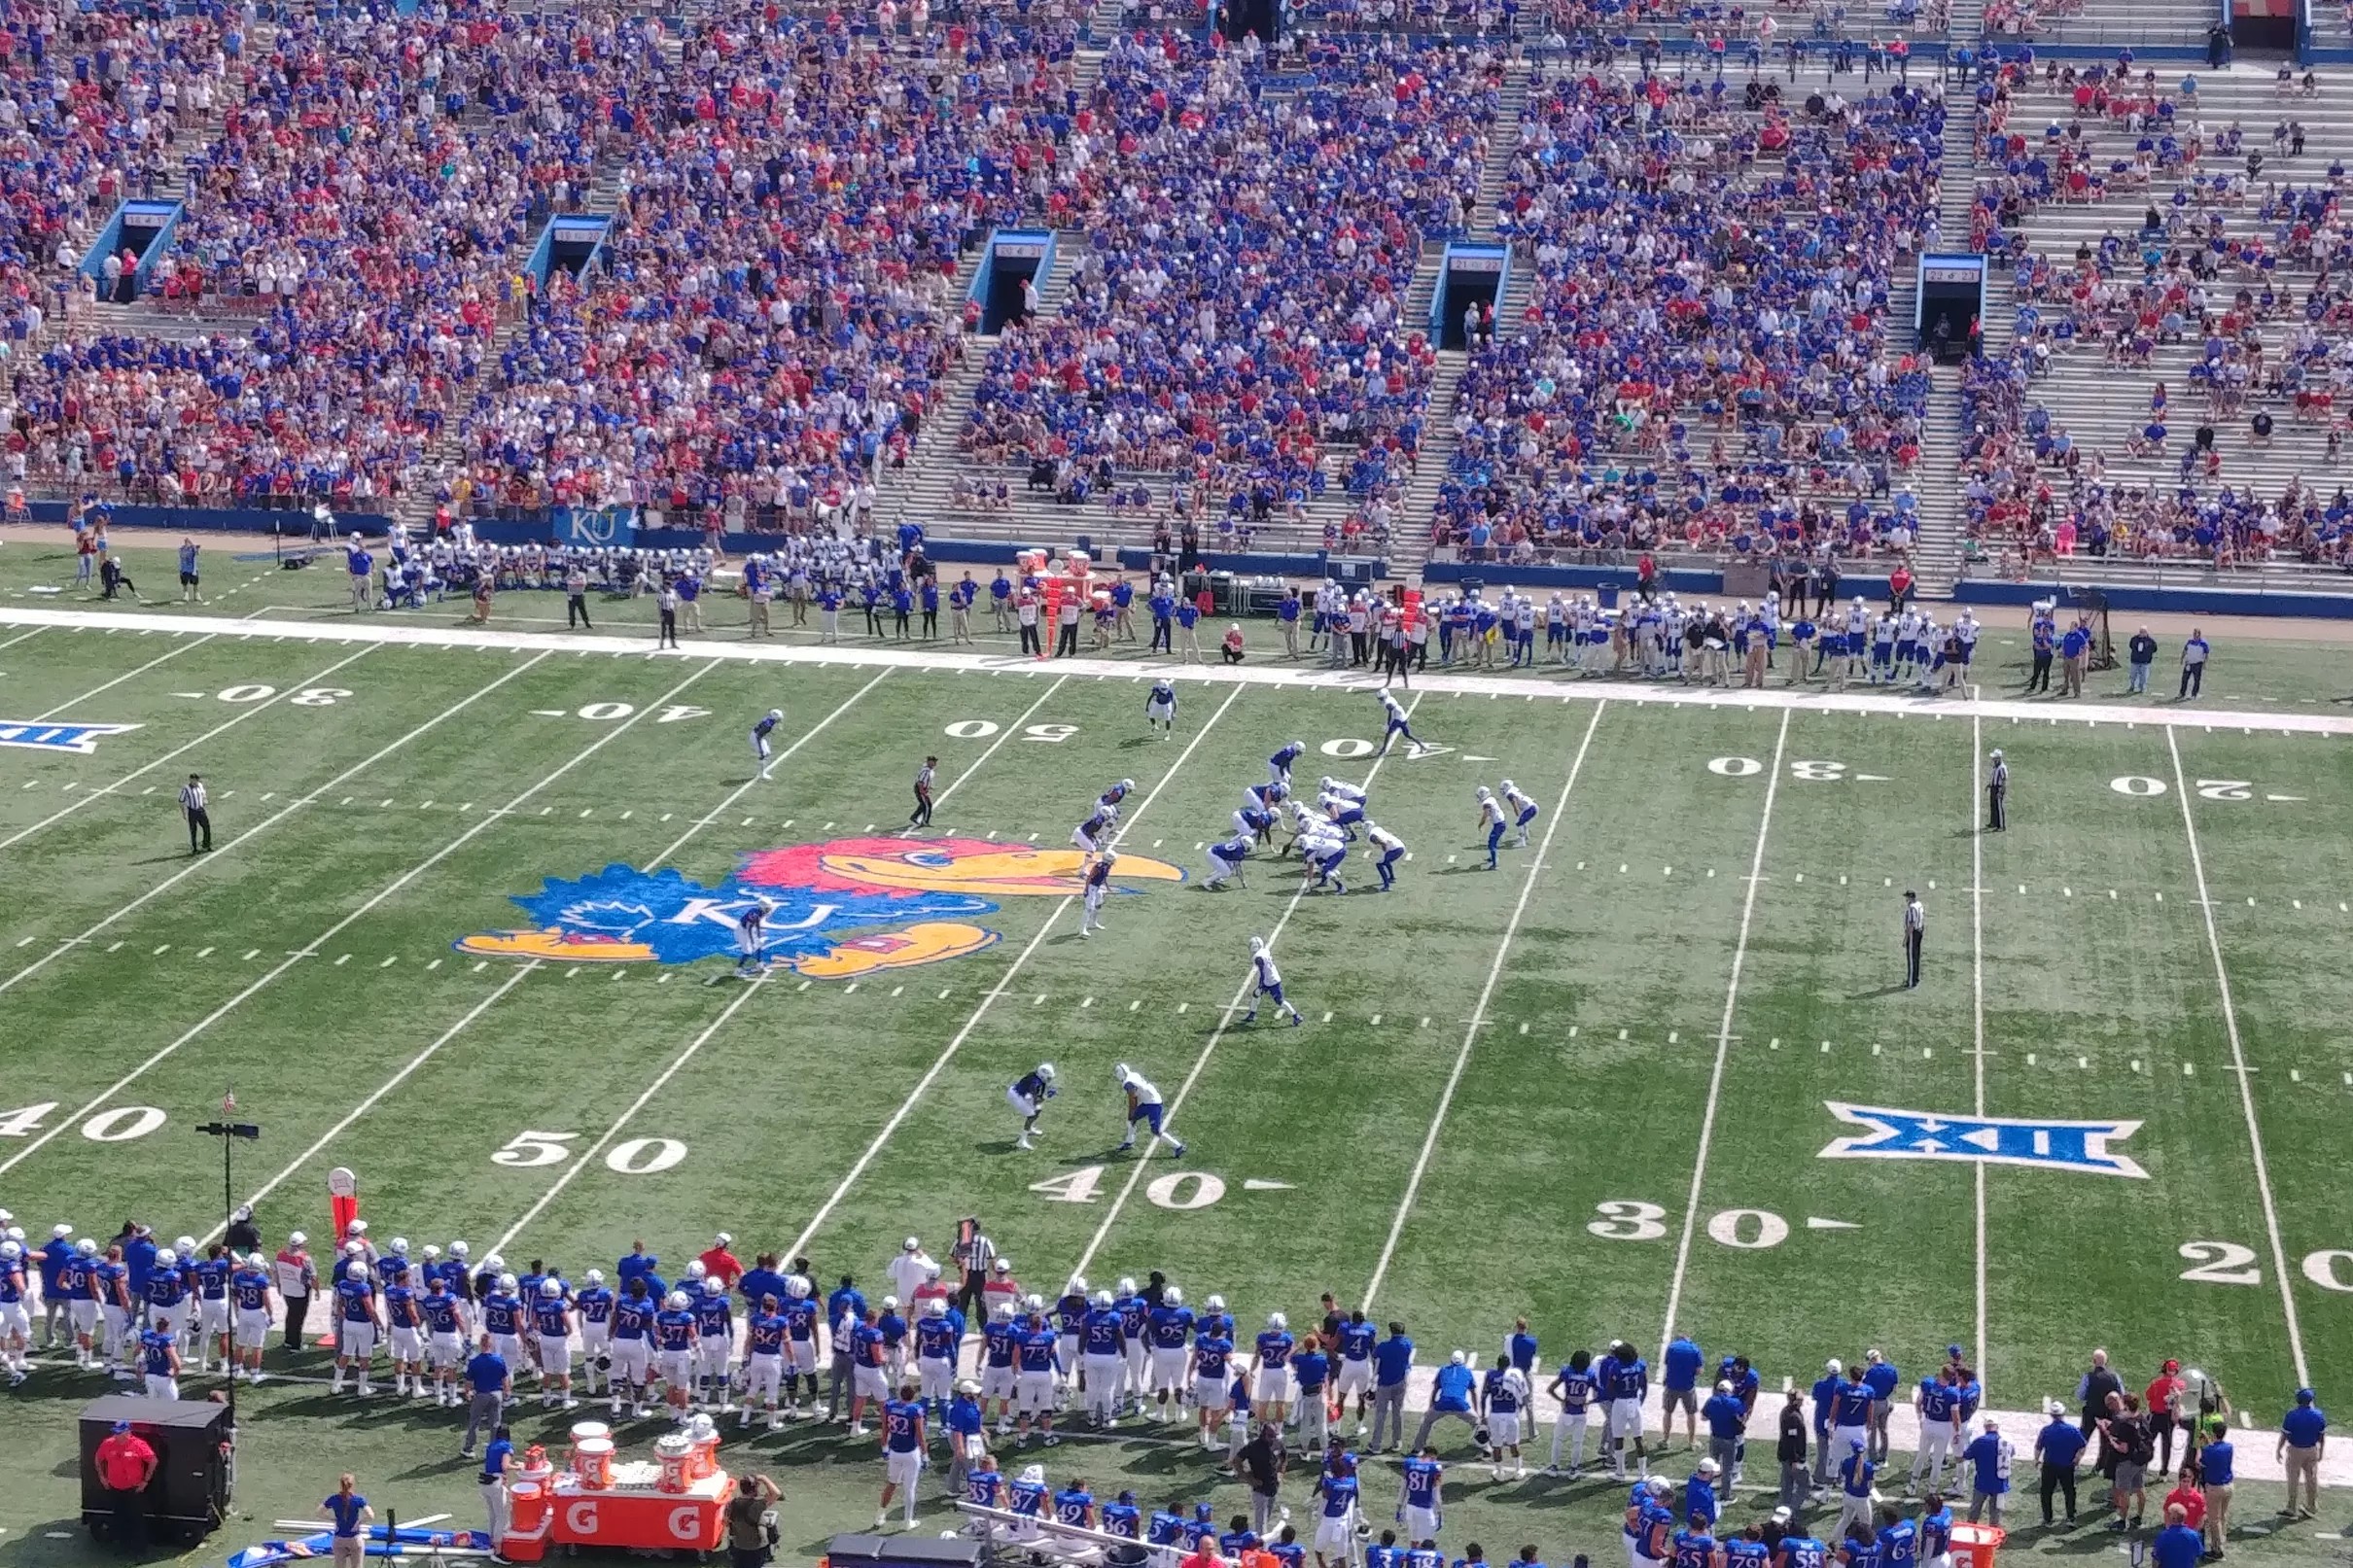 Kansas vs Indiana State The View from Section 5